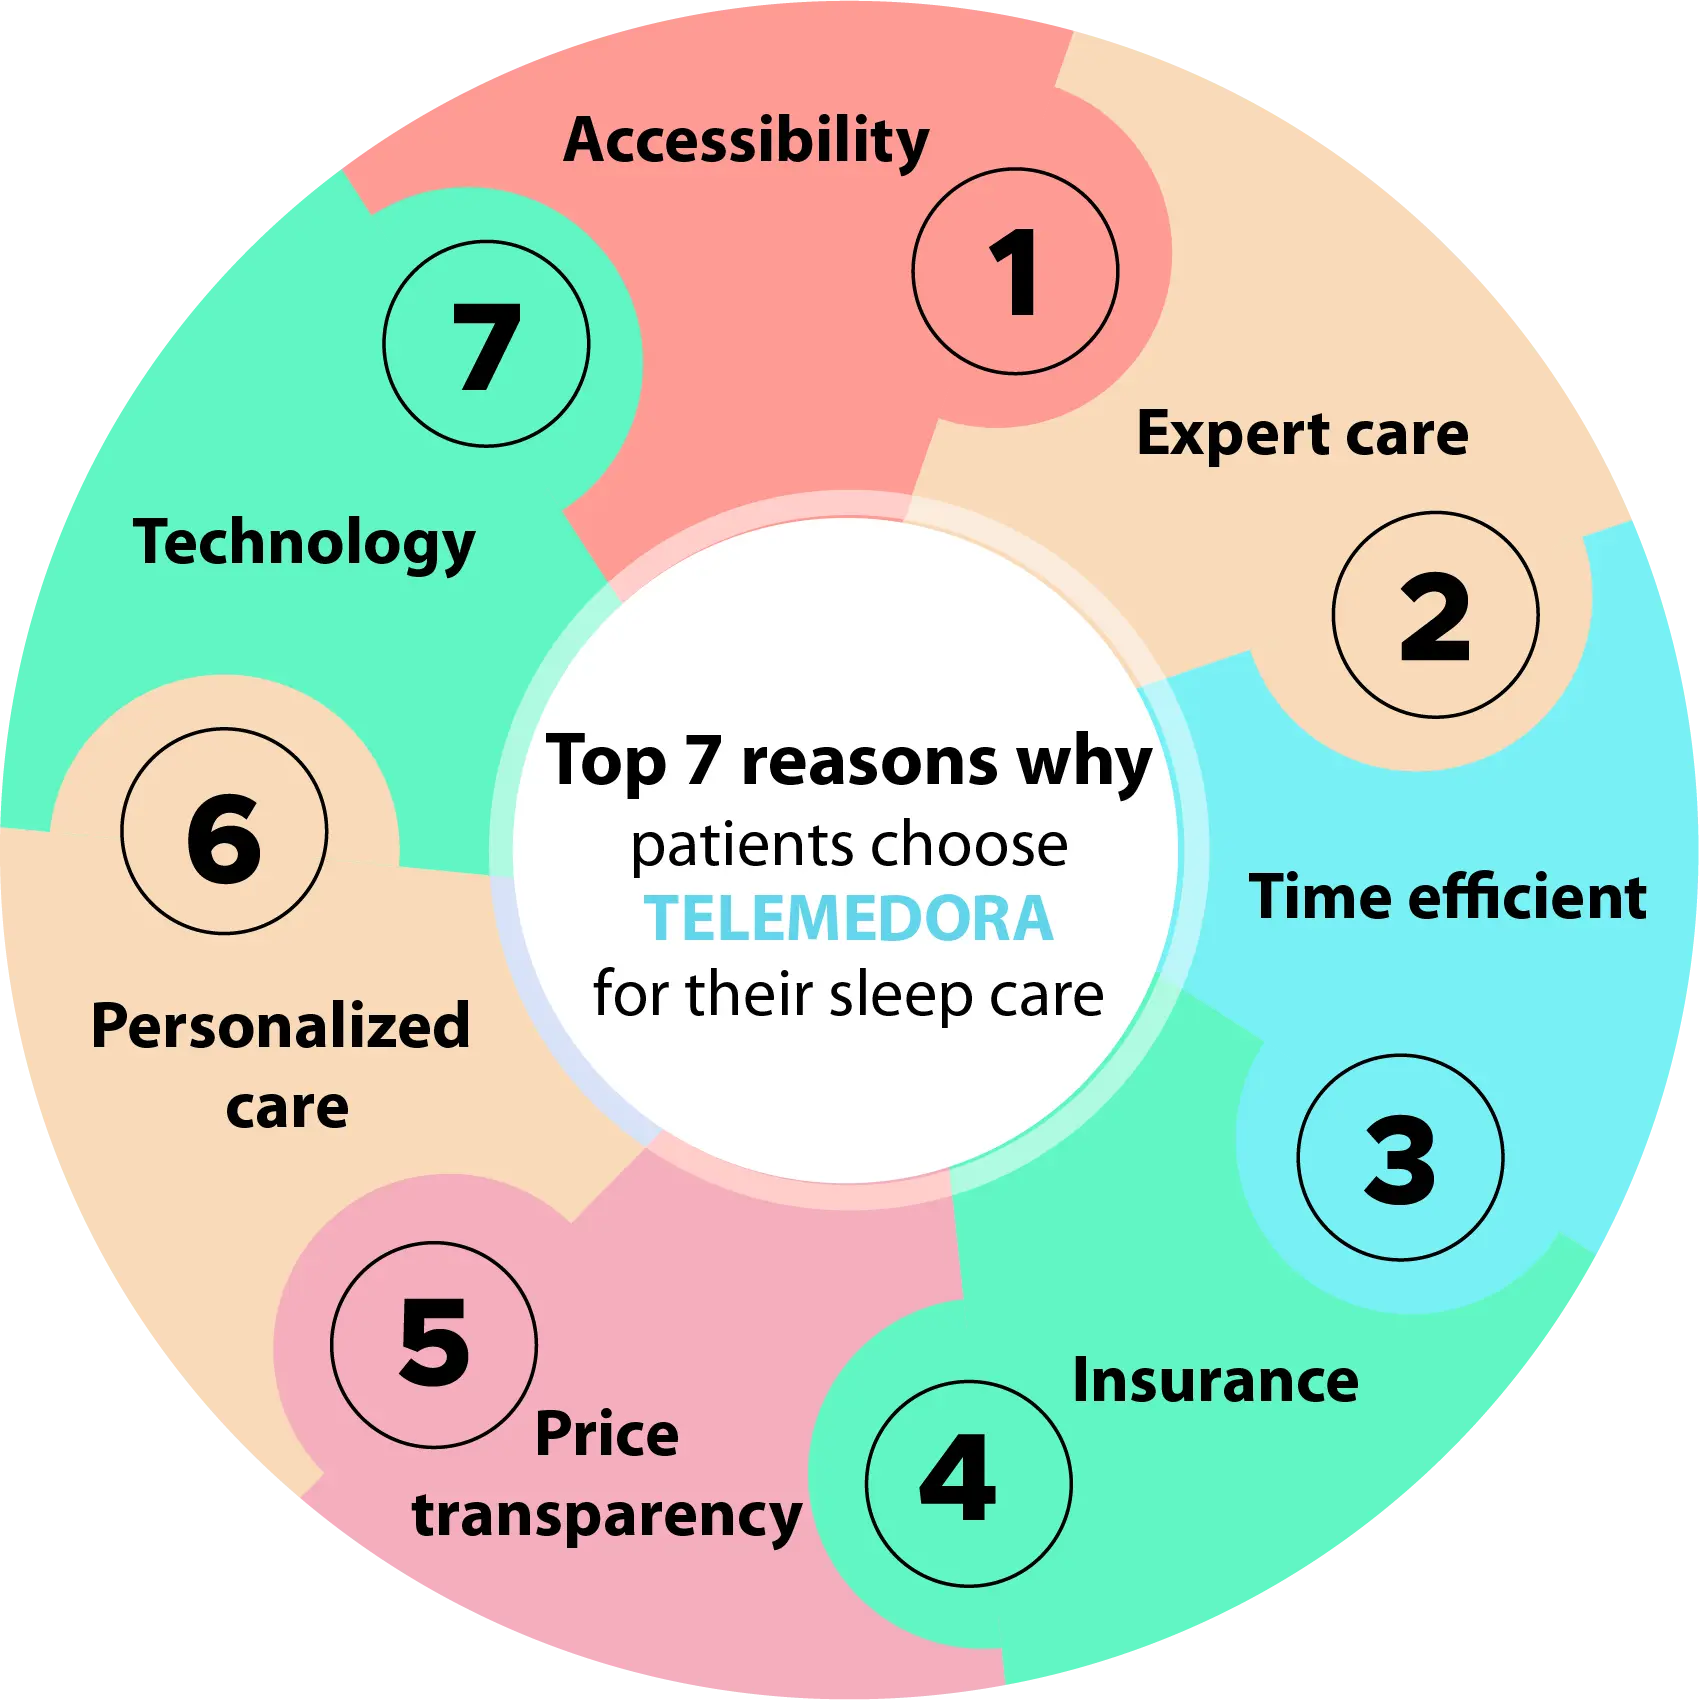 A chart showing top 7 reasons why patients choose Telemedora for their sleep care